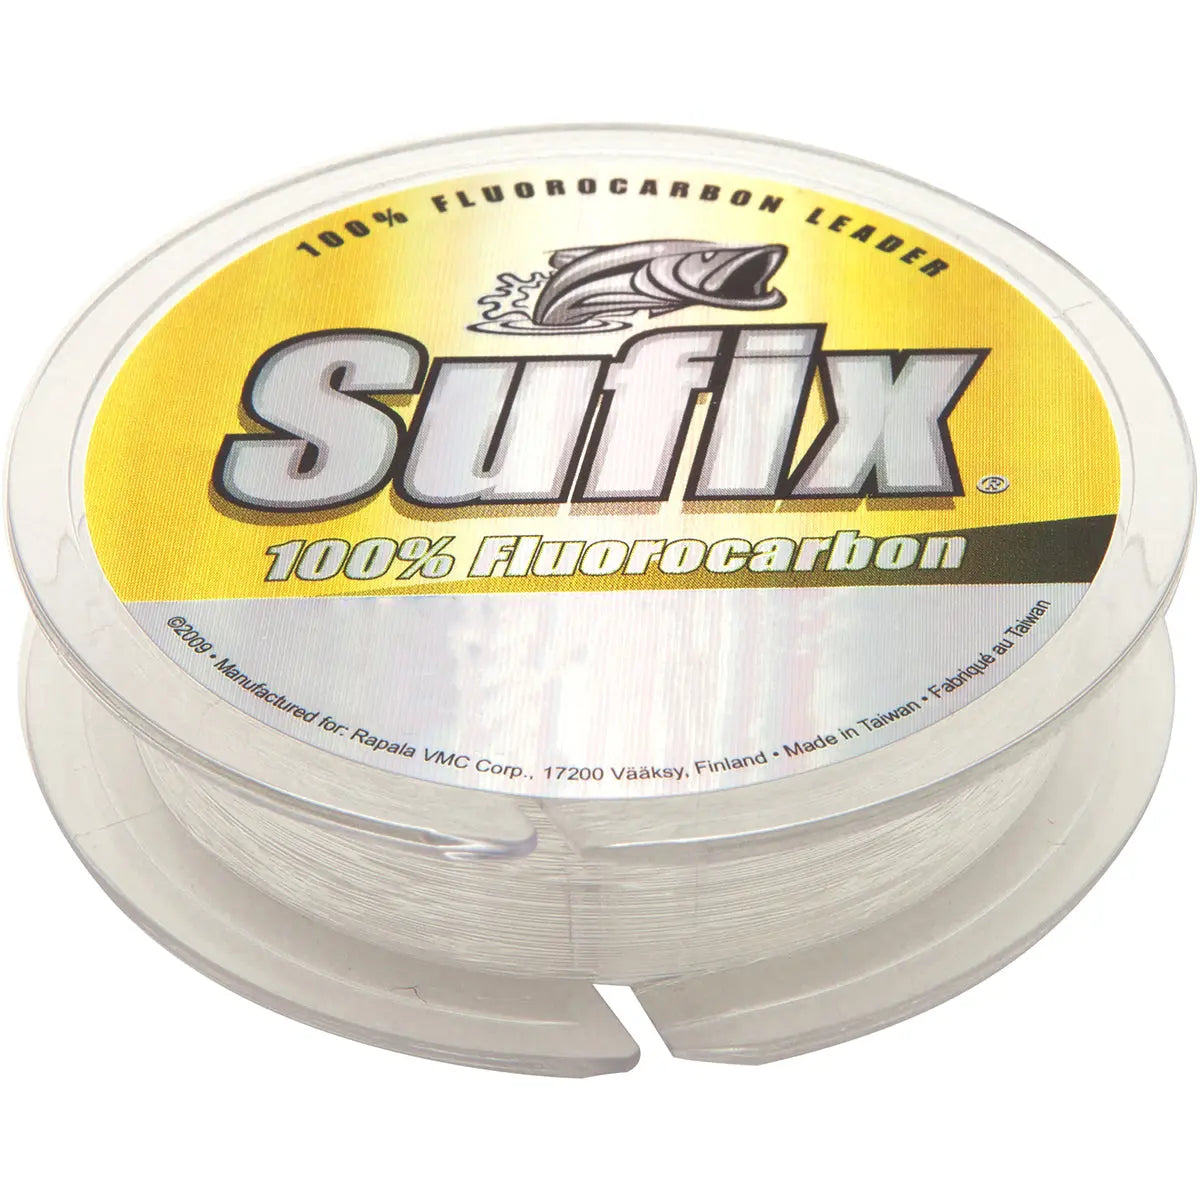  Vicious Fishing 100% Fluorocarbon Leader - 30LB, 110 Yards :  Sports & Outdoors